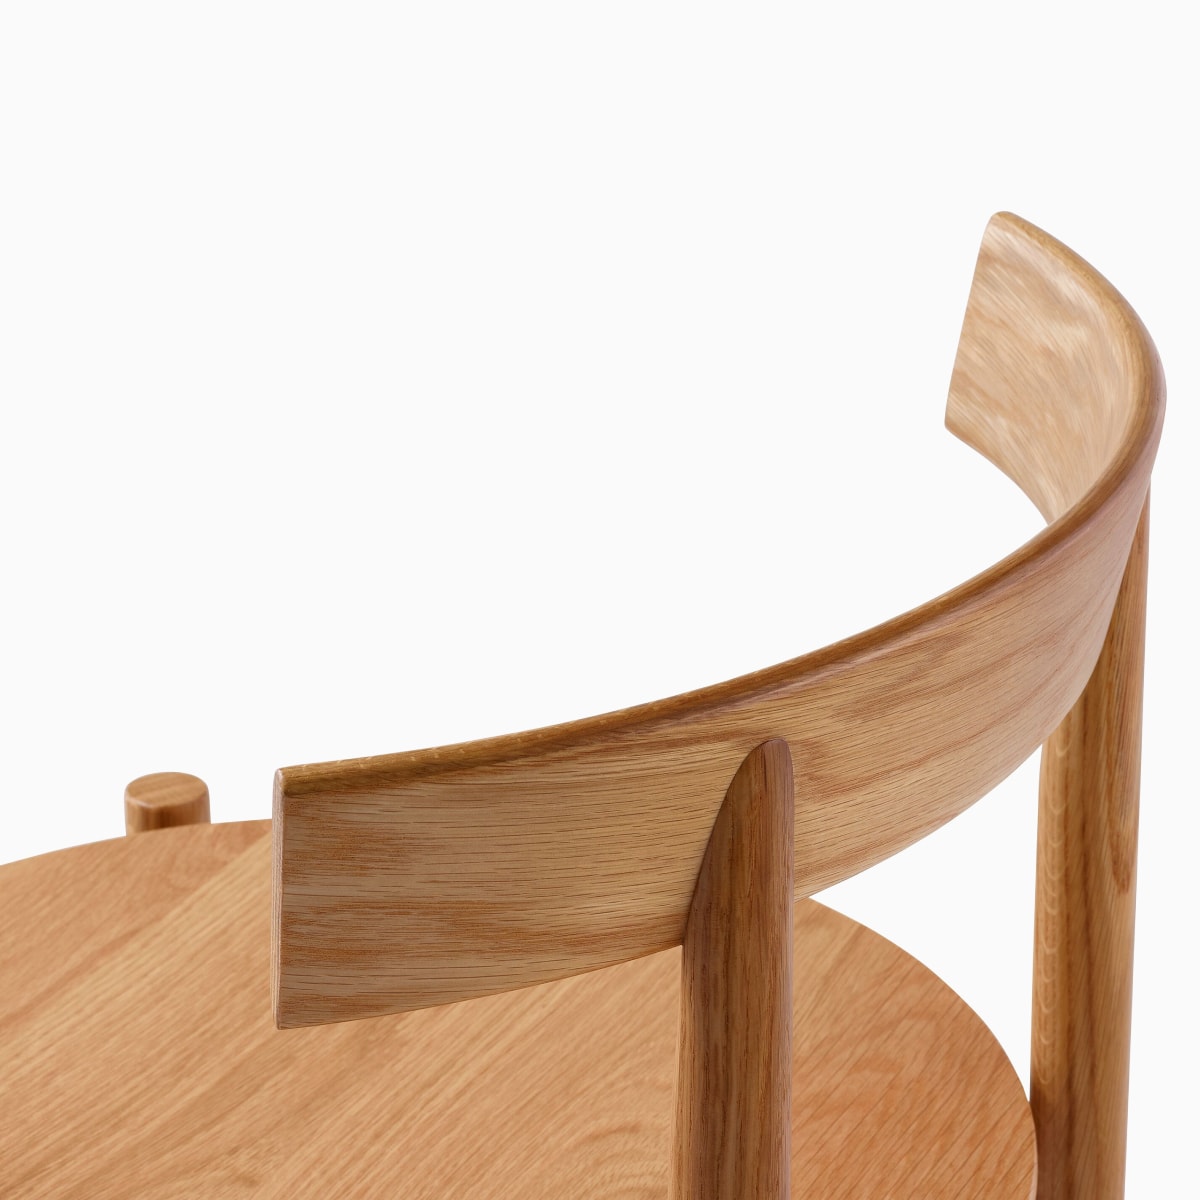 A close-up detail shot of a Comma Stool where the backrest meets the frame.